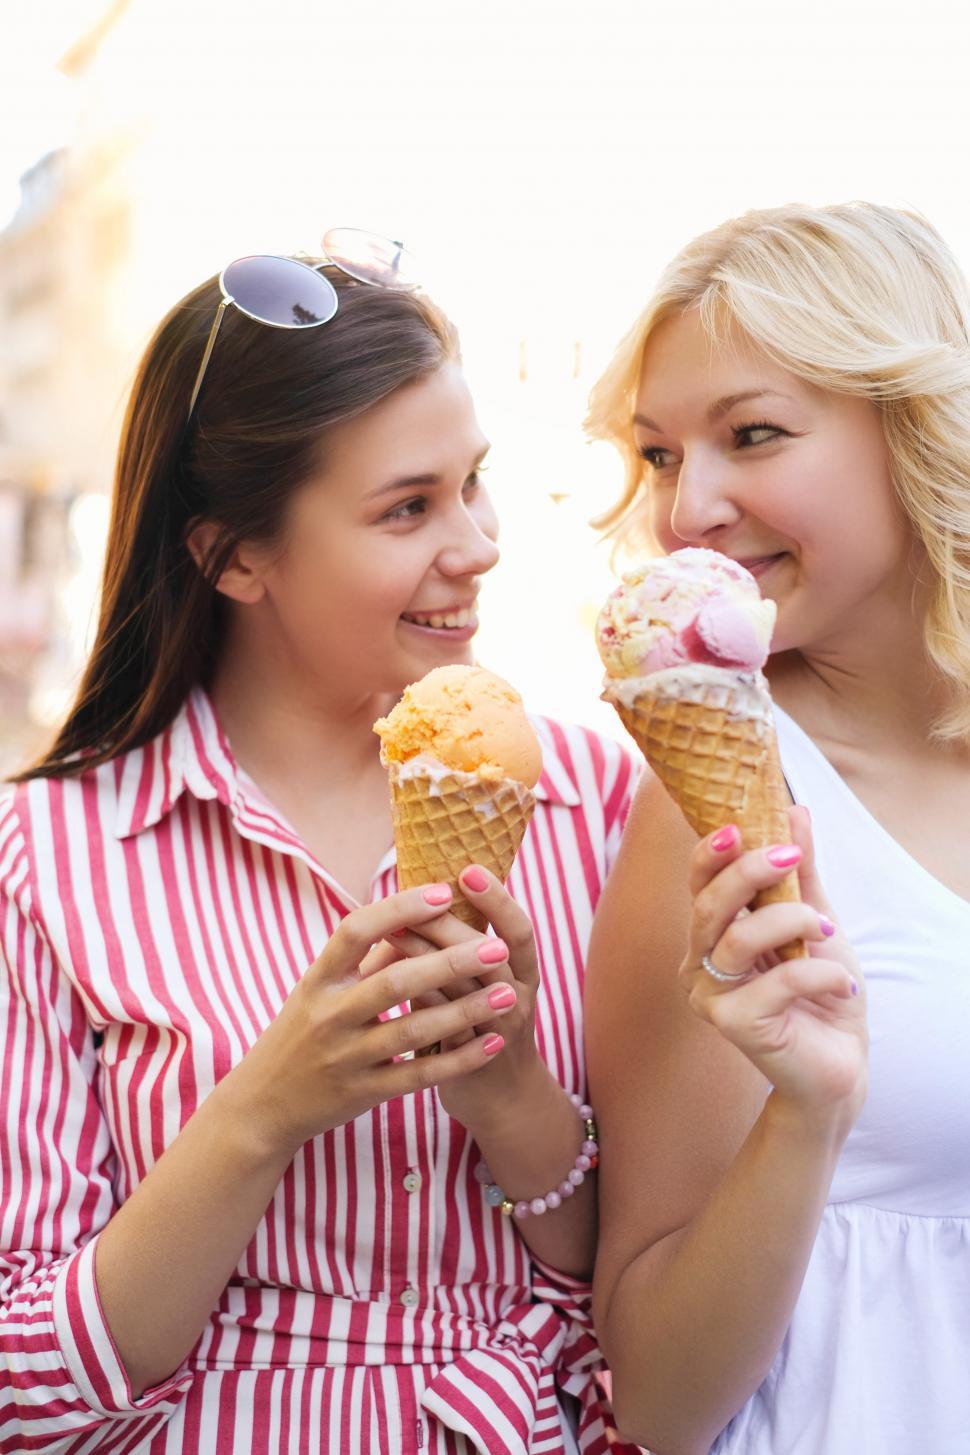 Free Image of Two Women with Ice Cream Cones 